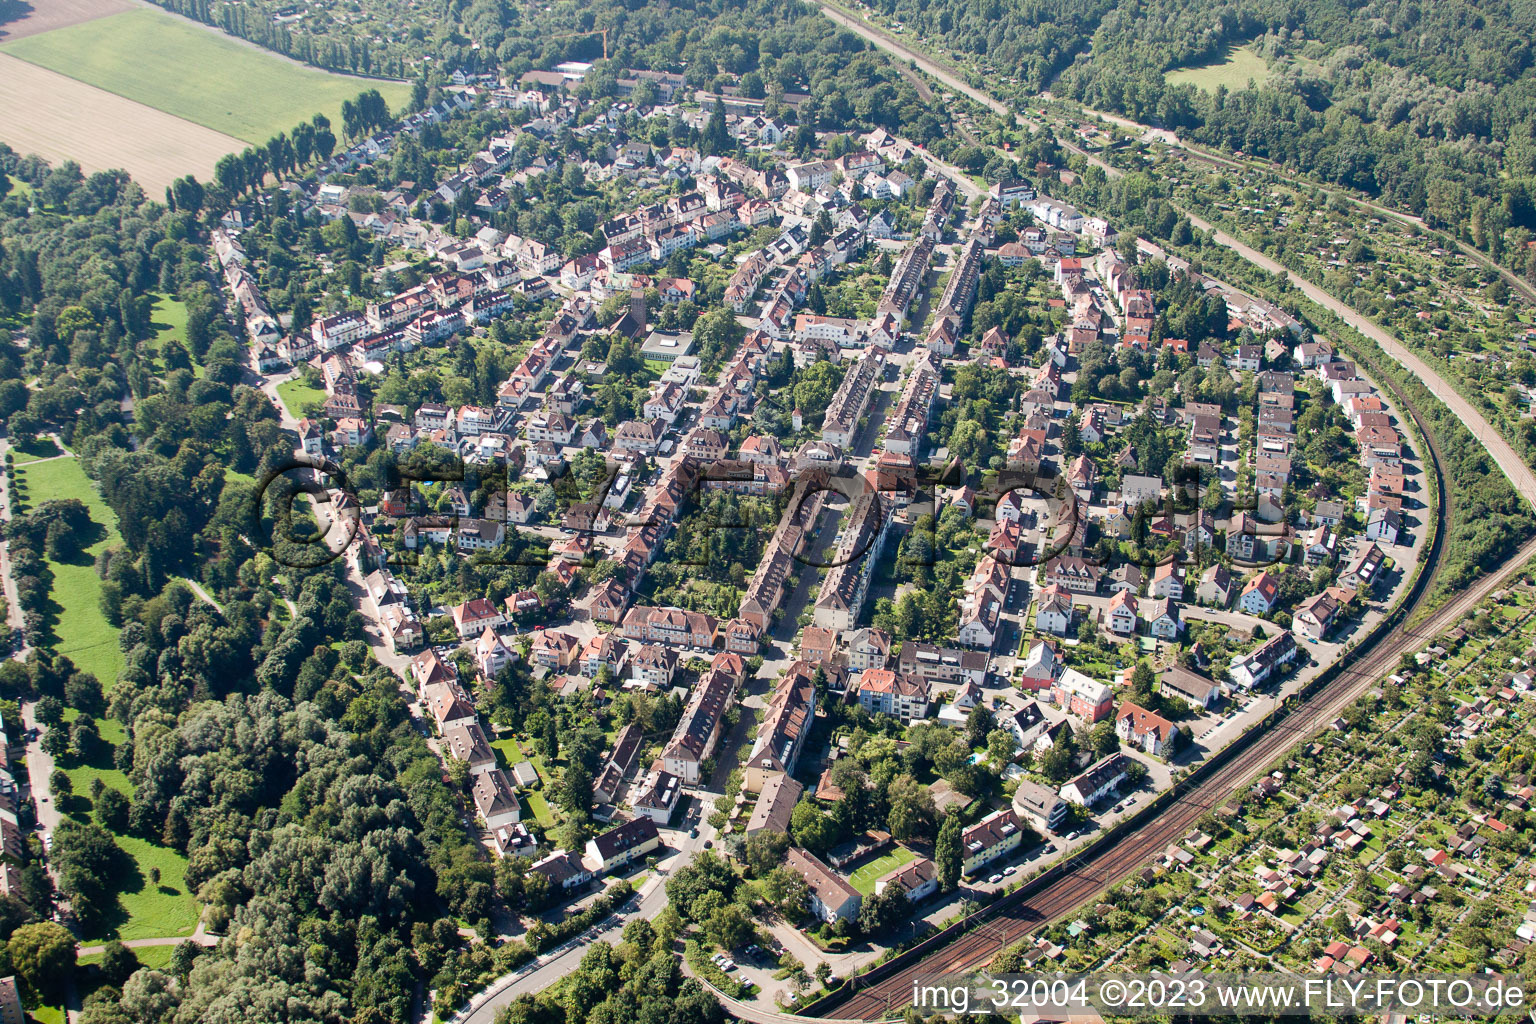 Oblique view of Dammerstock in the district Weiherfeld-Dammerstock in Karlsruhe in the state Baden-Wuerttemberg, Germany